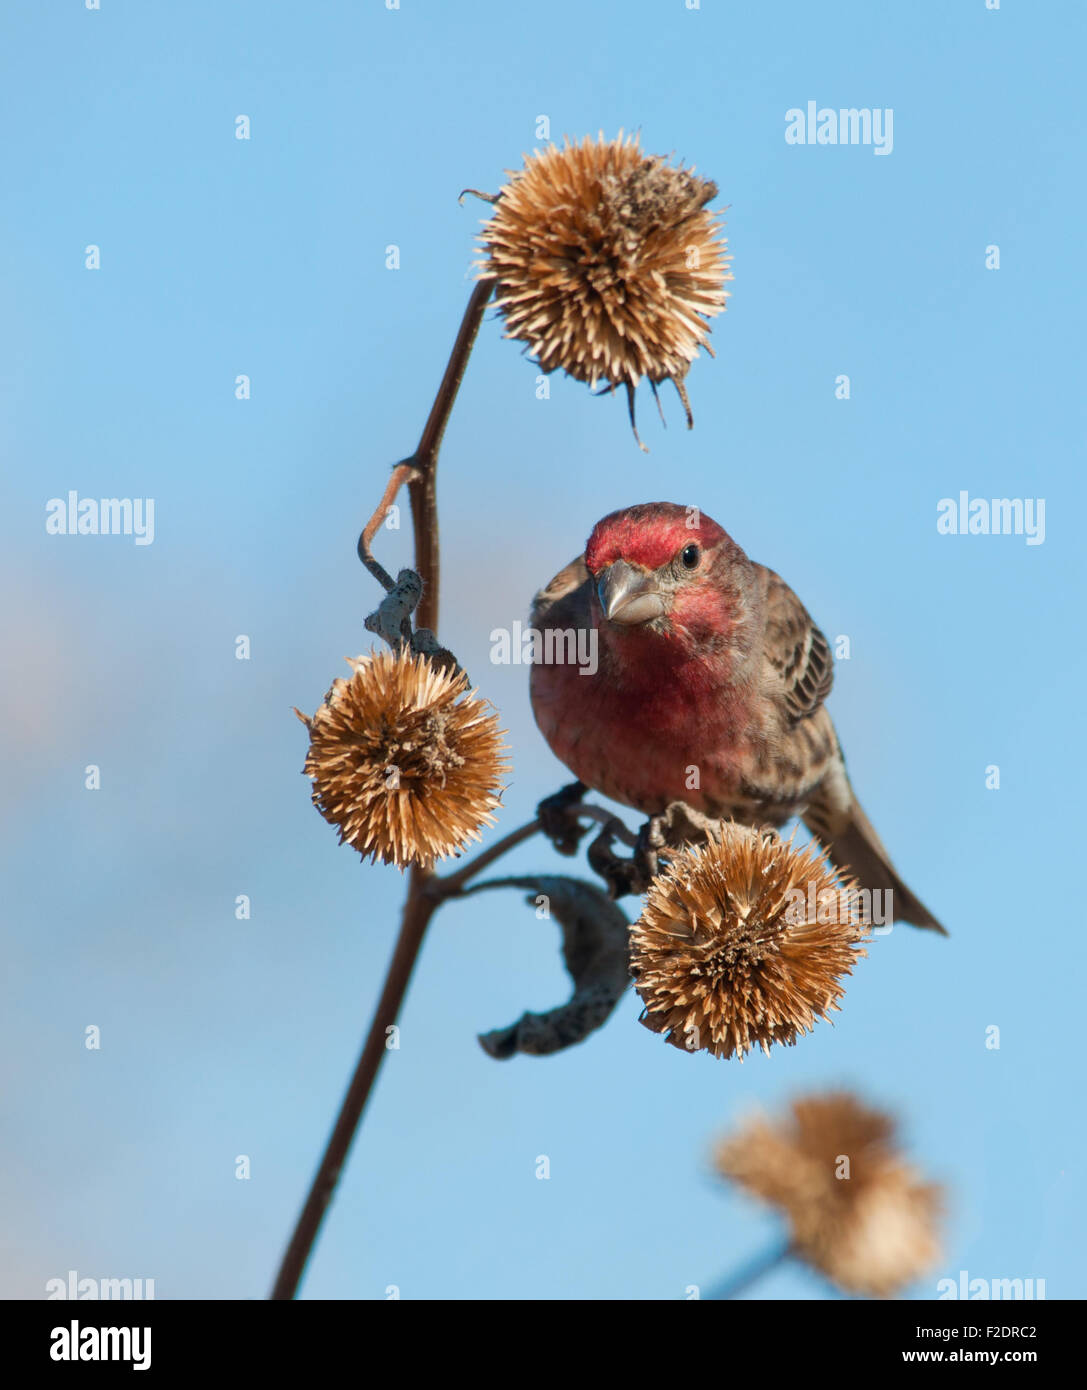 Male House Finch looking for seeds in a dry Sunflower in winter Stock Photo